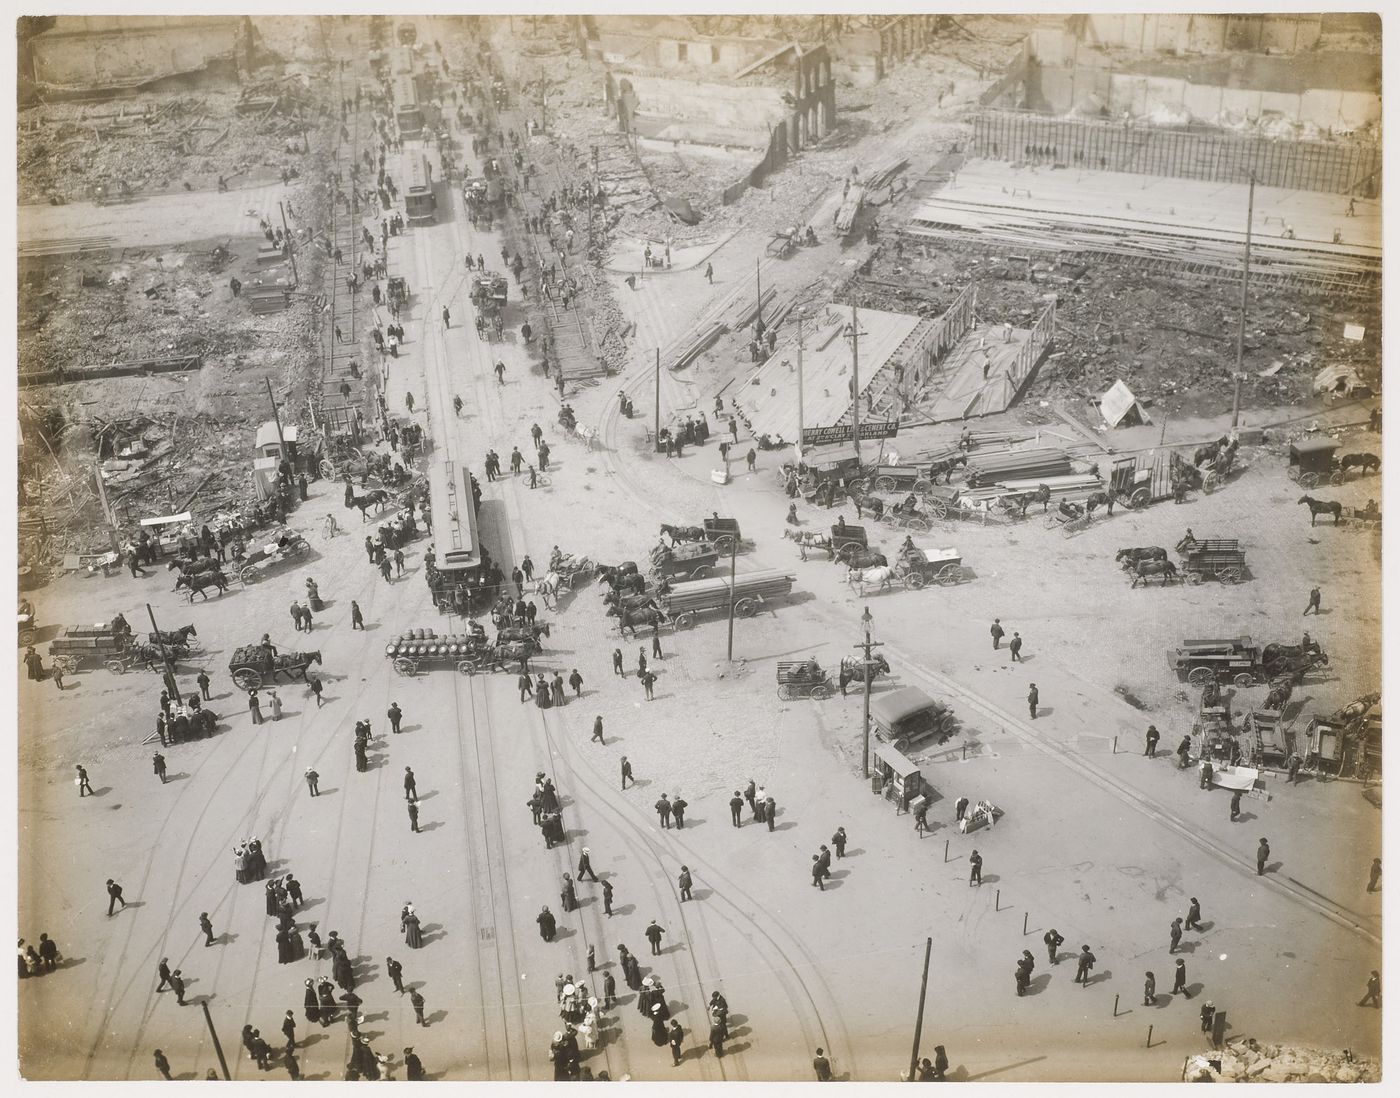 General view of the aftermath of the 1906 earthquake and fire, looking down Market Street from the Ferry Building Tower, San Francisco, California